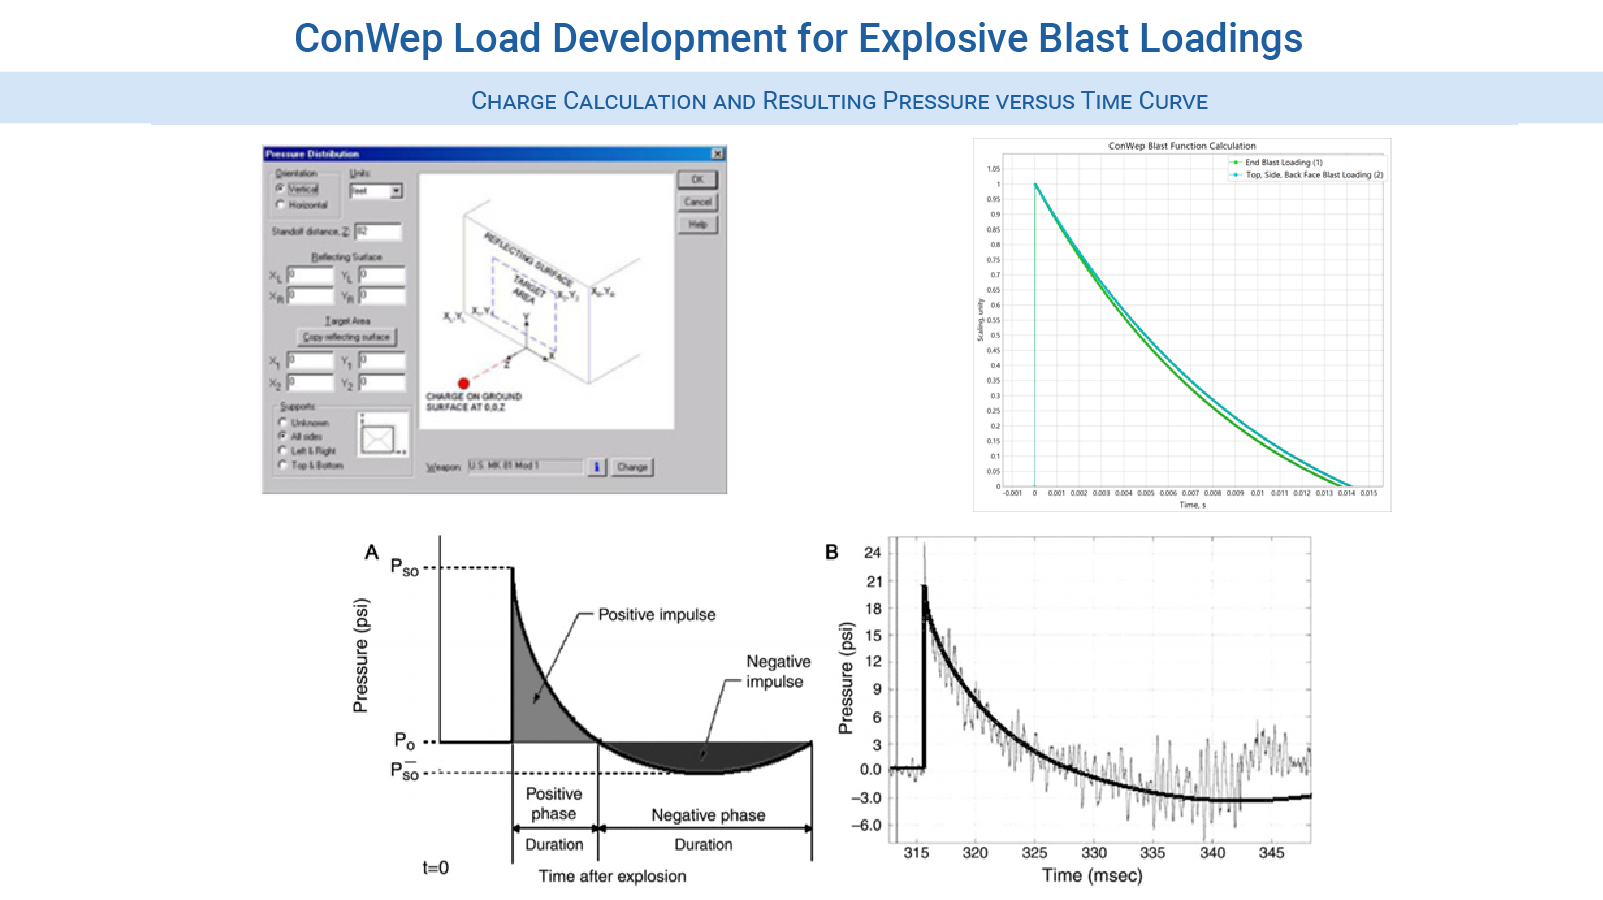 Nonlinear Consulting Services - ConWep Blast Development for nonlinear transient LS-DYNA analysis